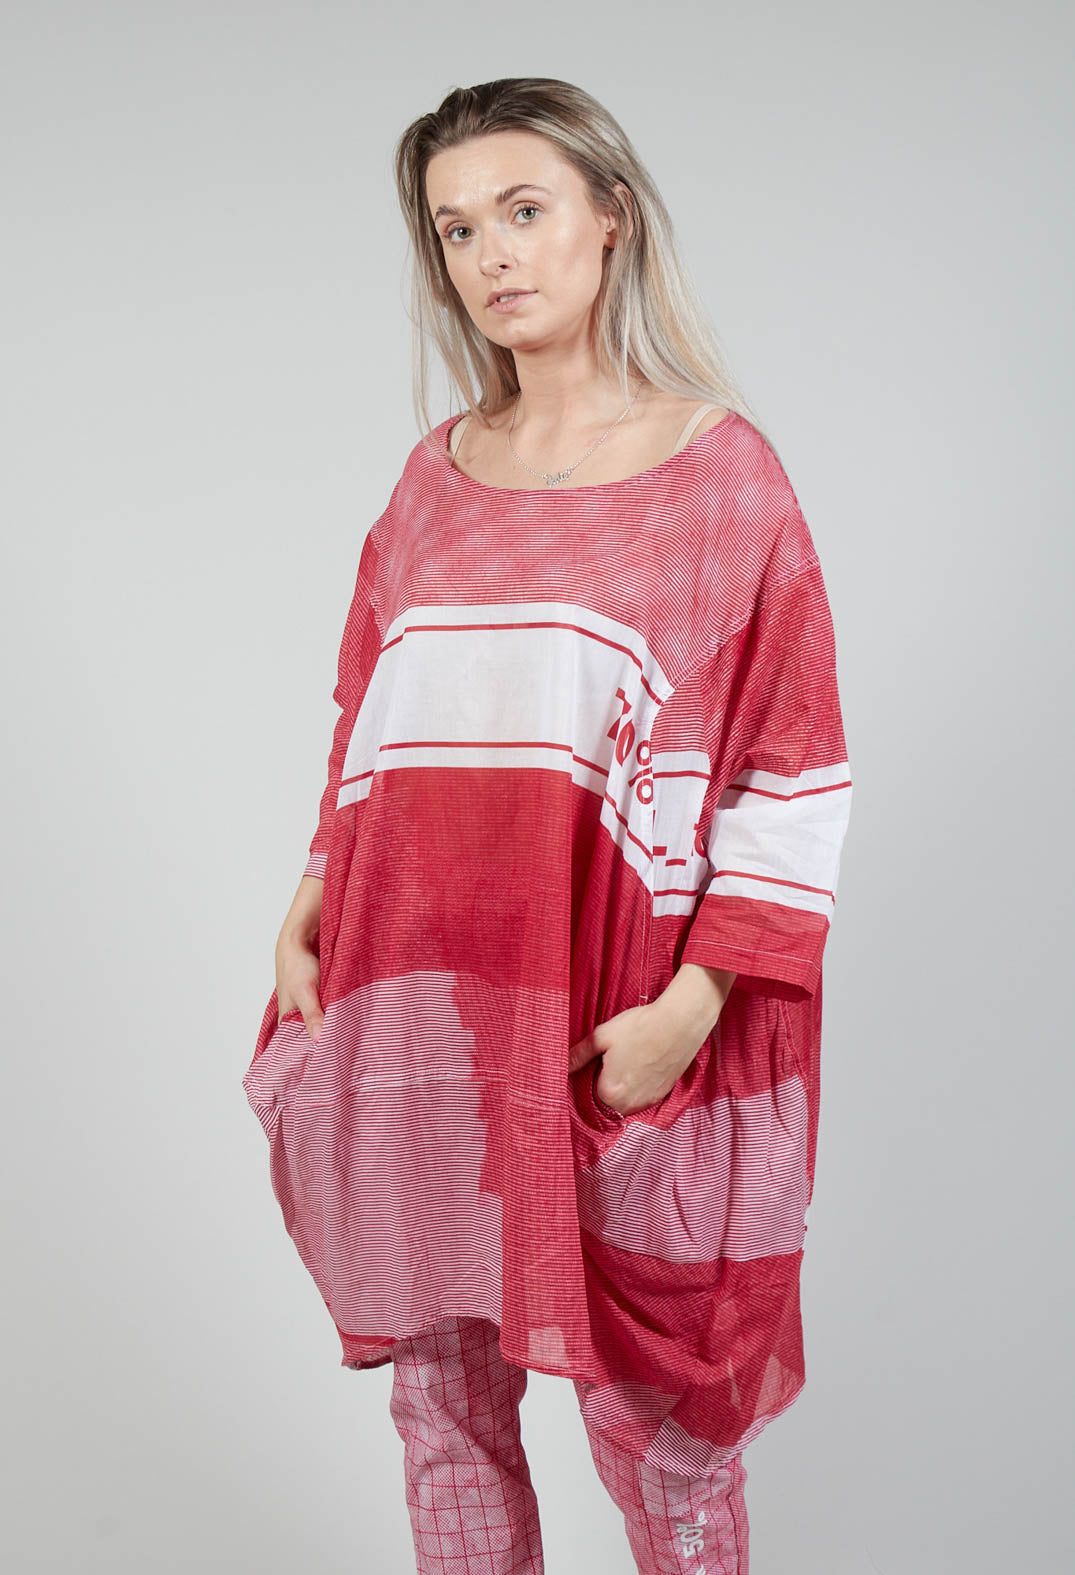 Relaxed Fit Cotton Top in Chili Print